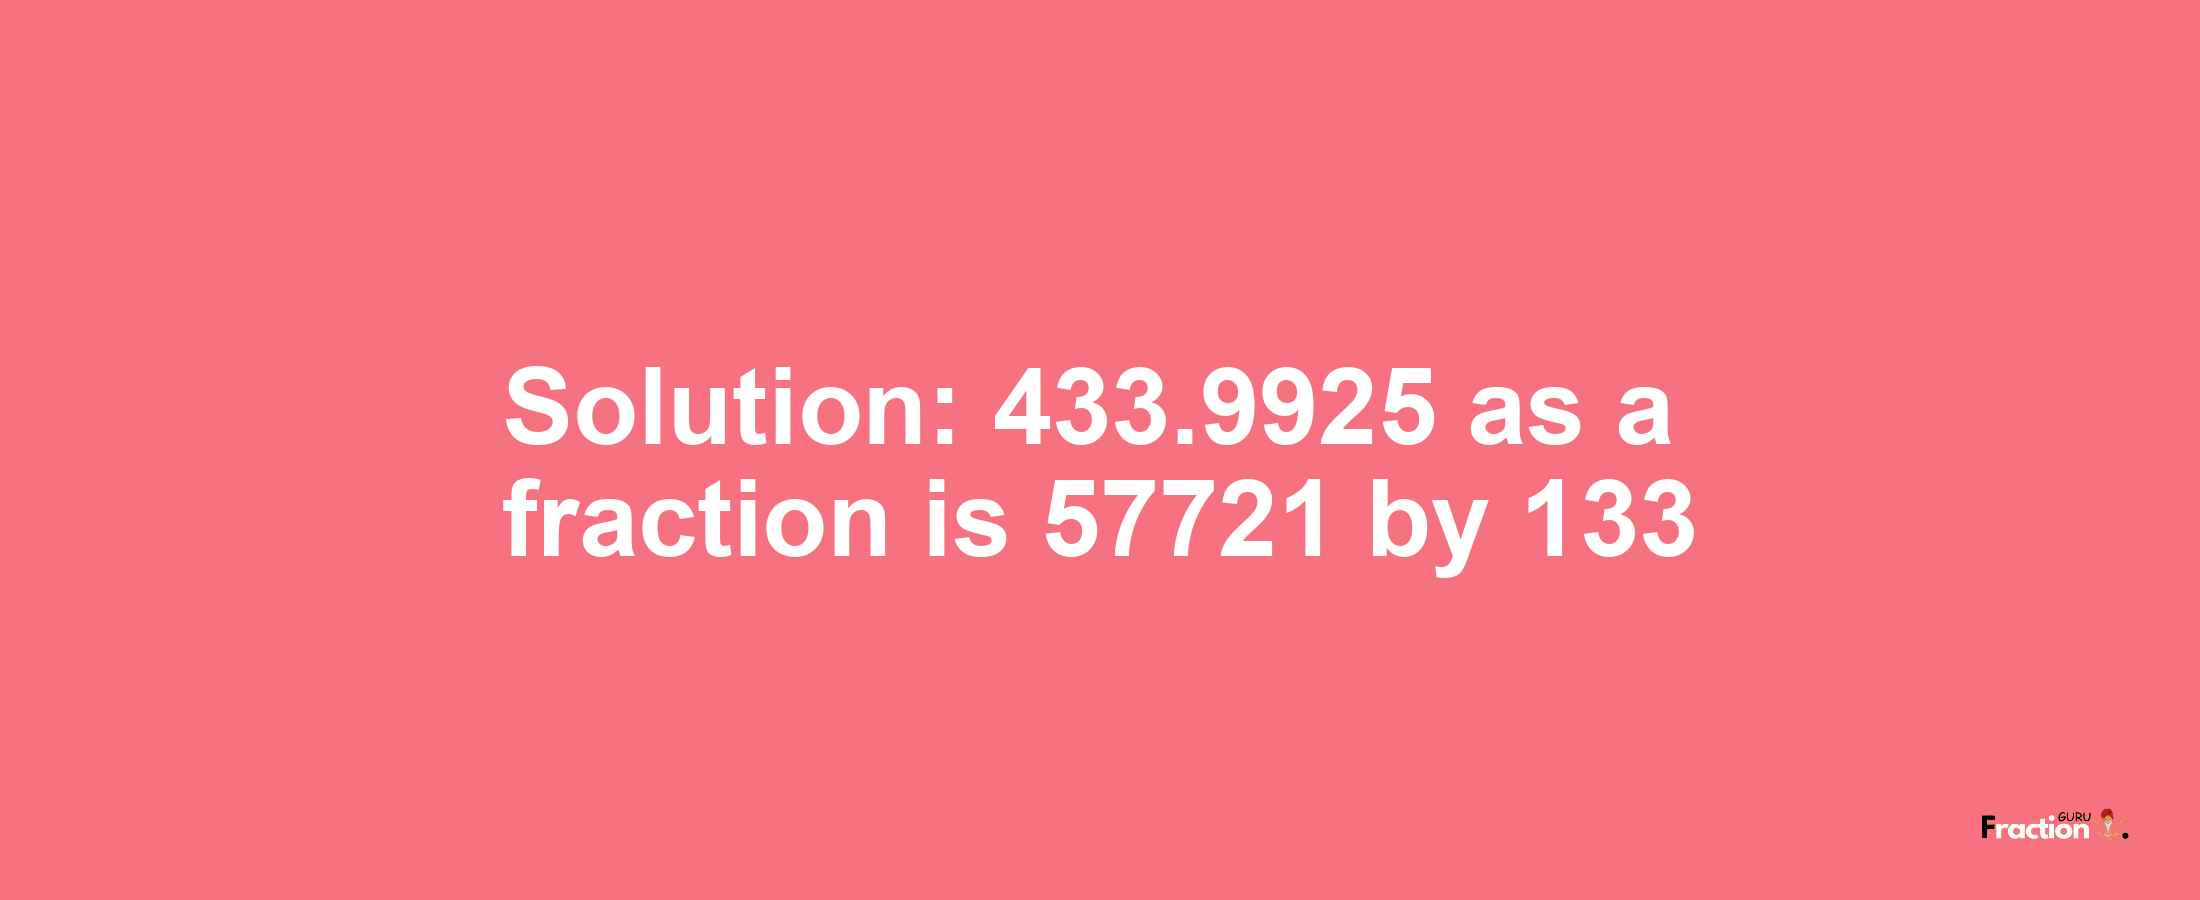 Solution:433.9925 as a fraction is 57721/133